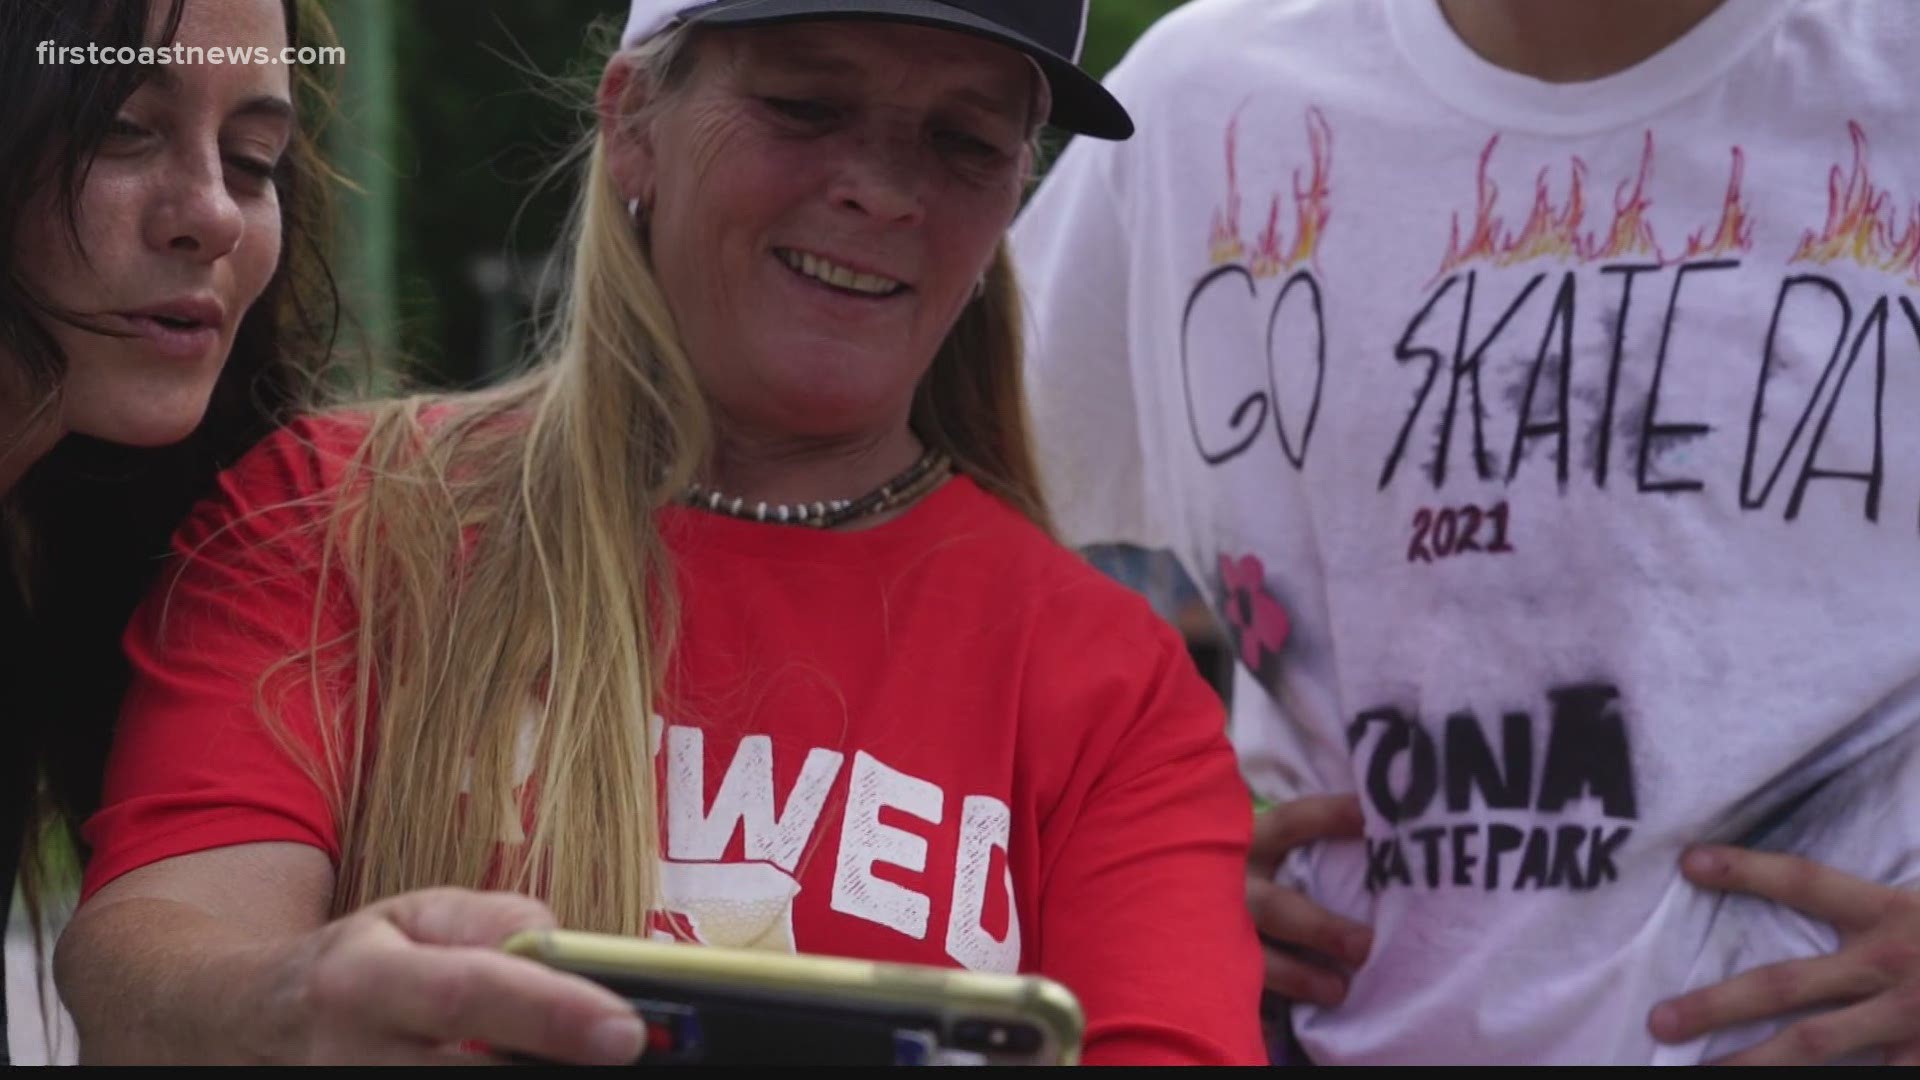 Florida Skateboard Hall of Famer, Peggy Turner has achieved acclaim in the sport but she never had the opportunity to compete on the Olympic level